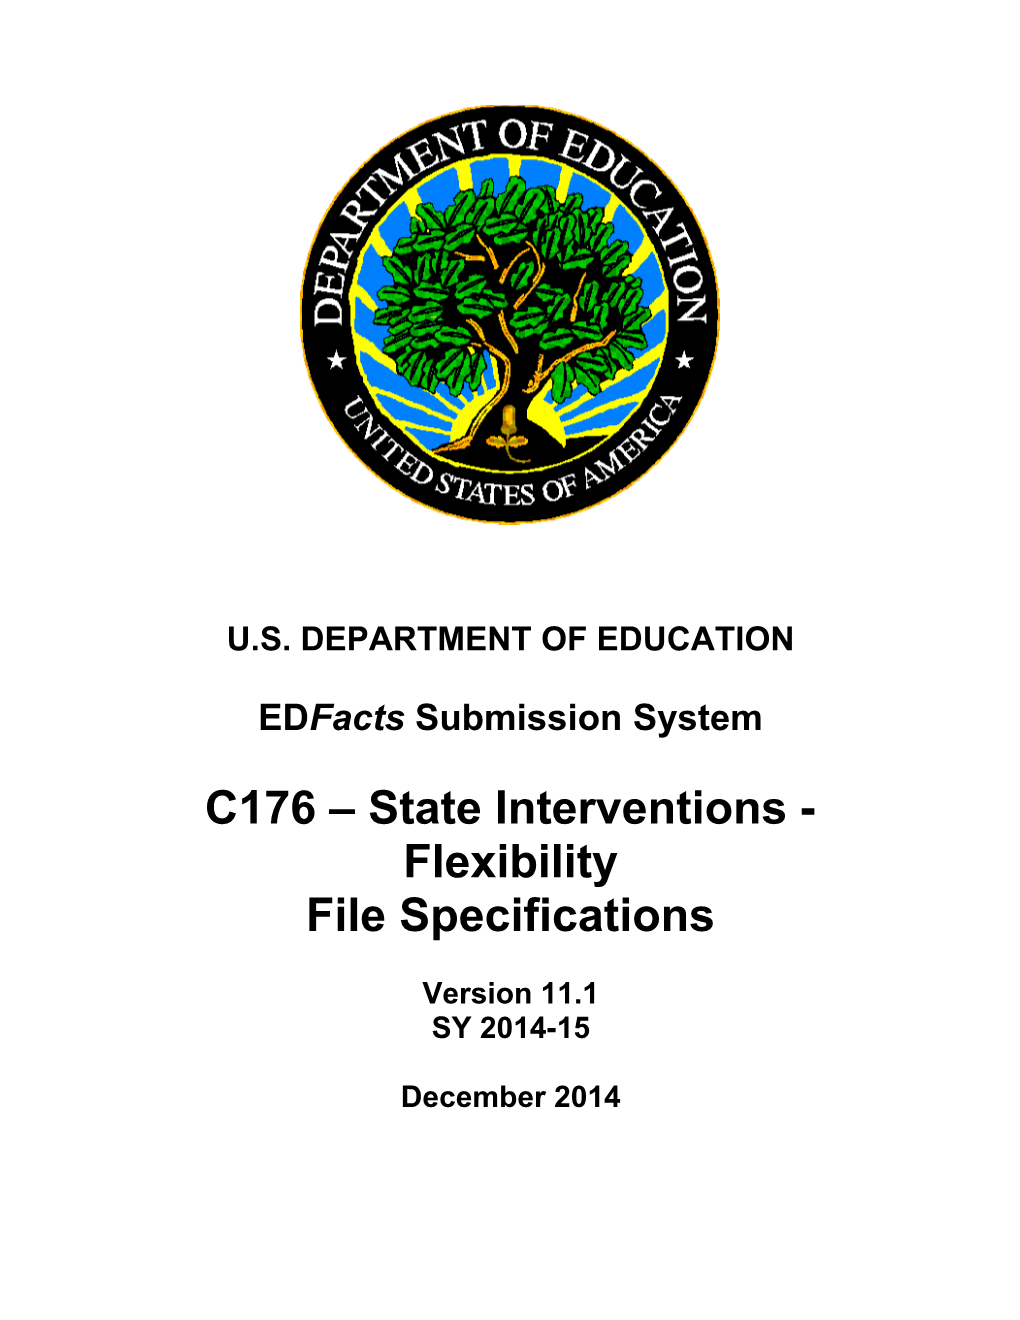 State Interventions - Flexibility File Specifications